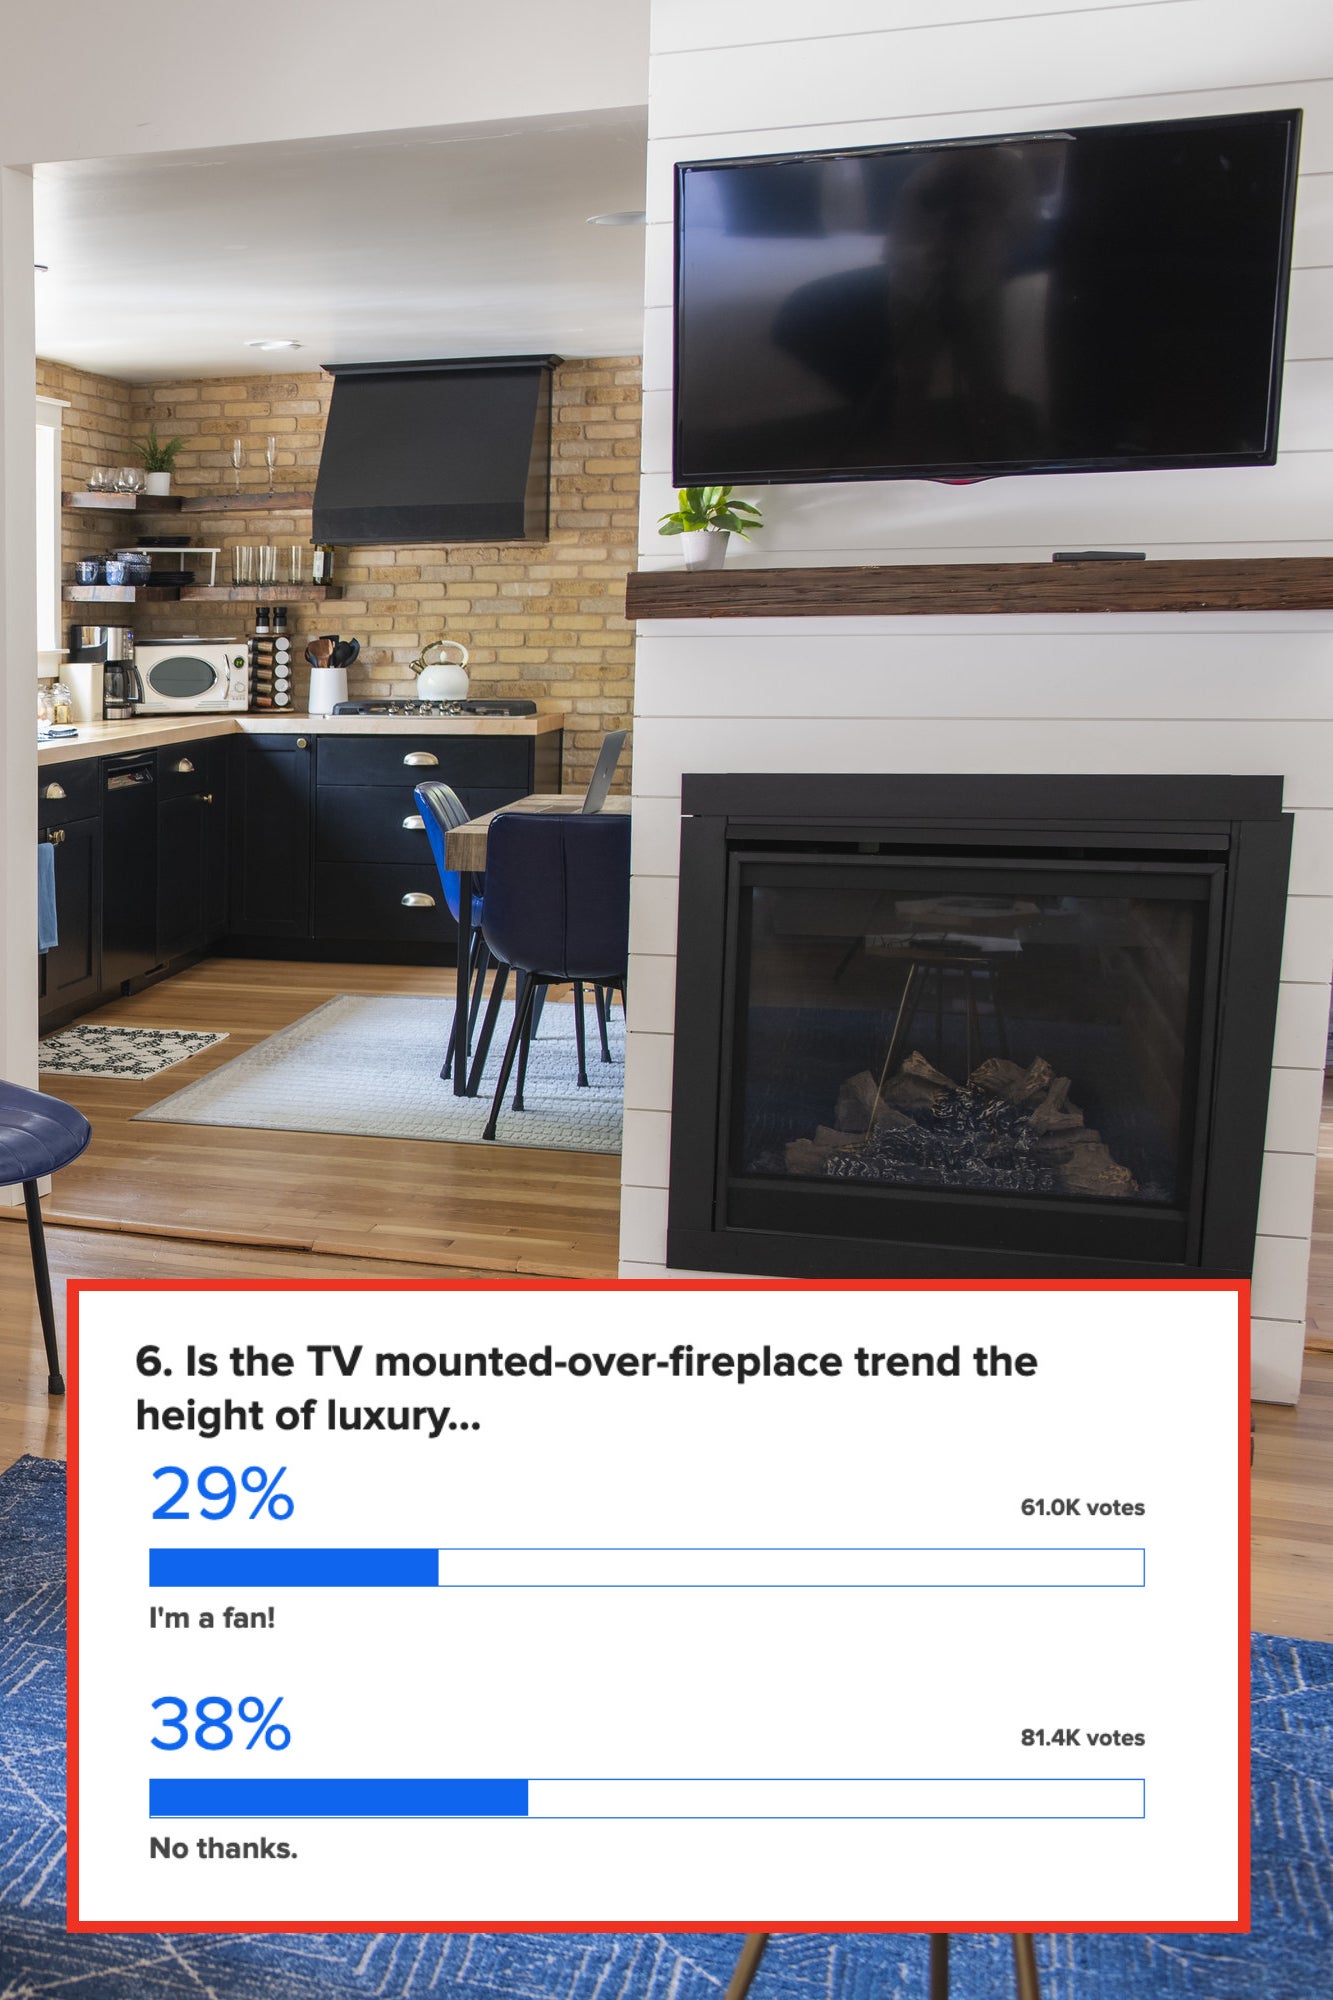 29% of people like TVs over fireplaces and 38% do not